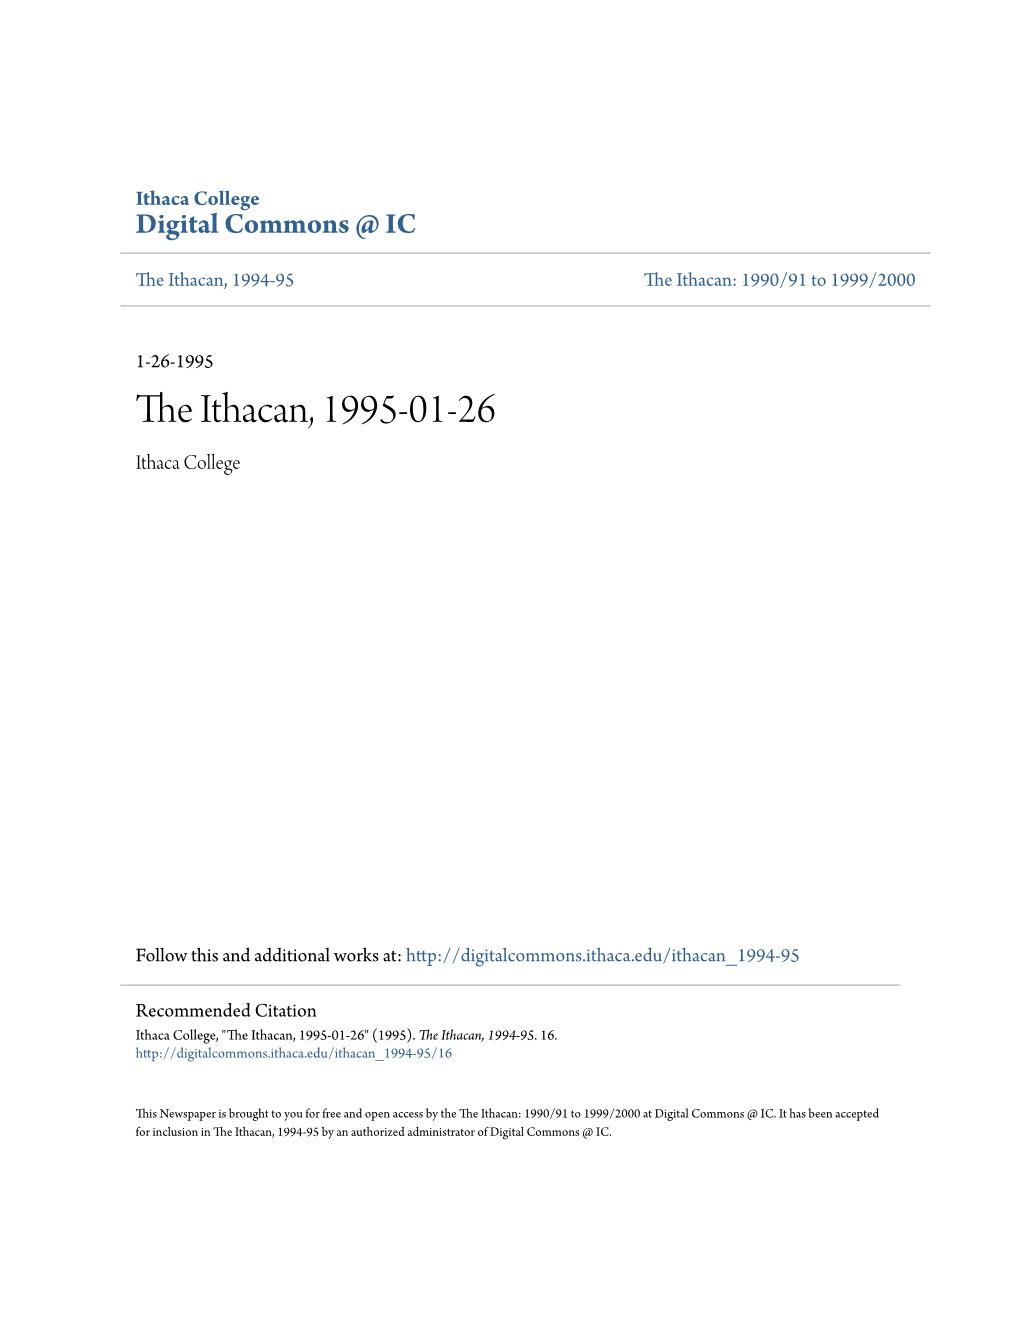 The Ithacan, 1995-01-26